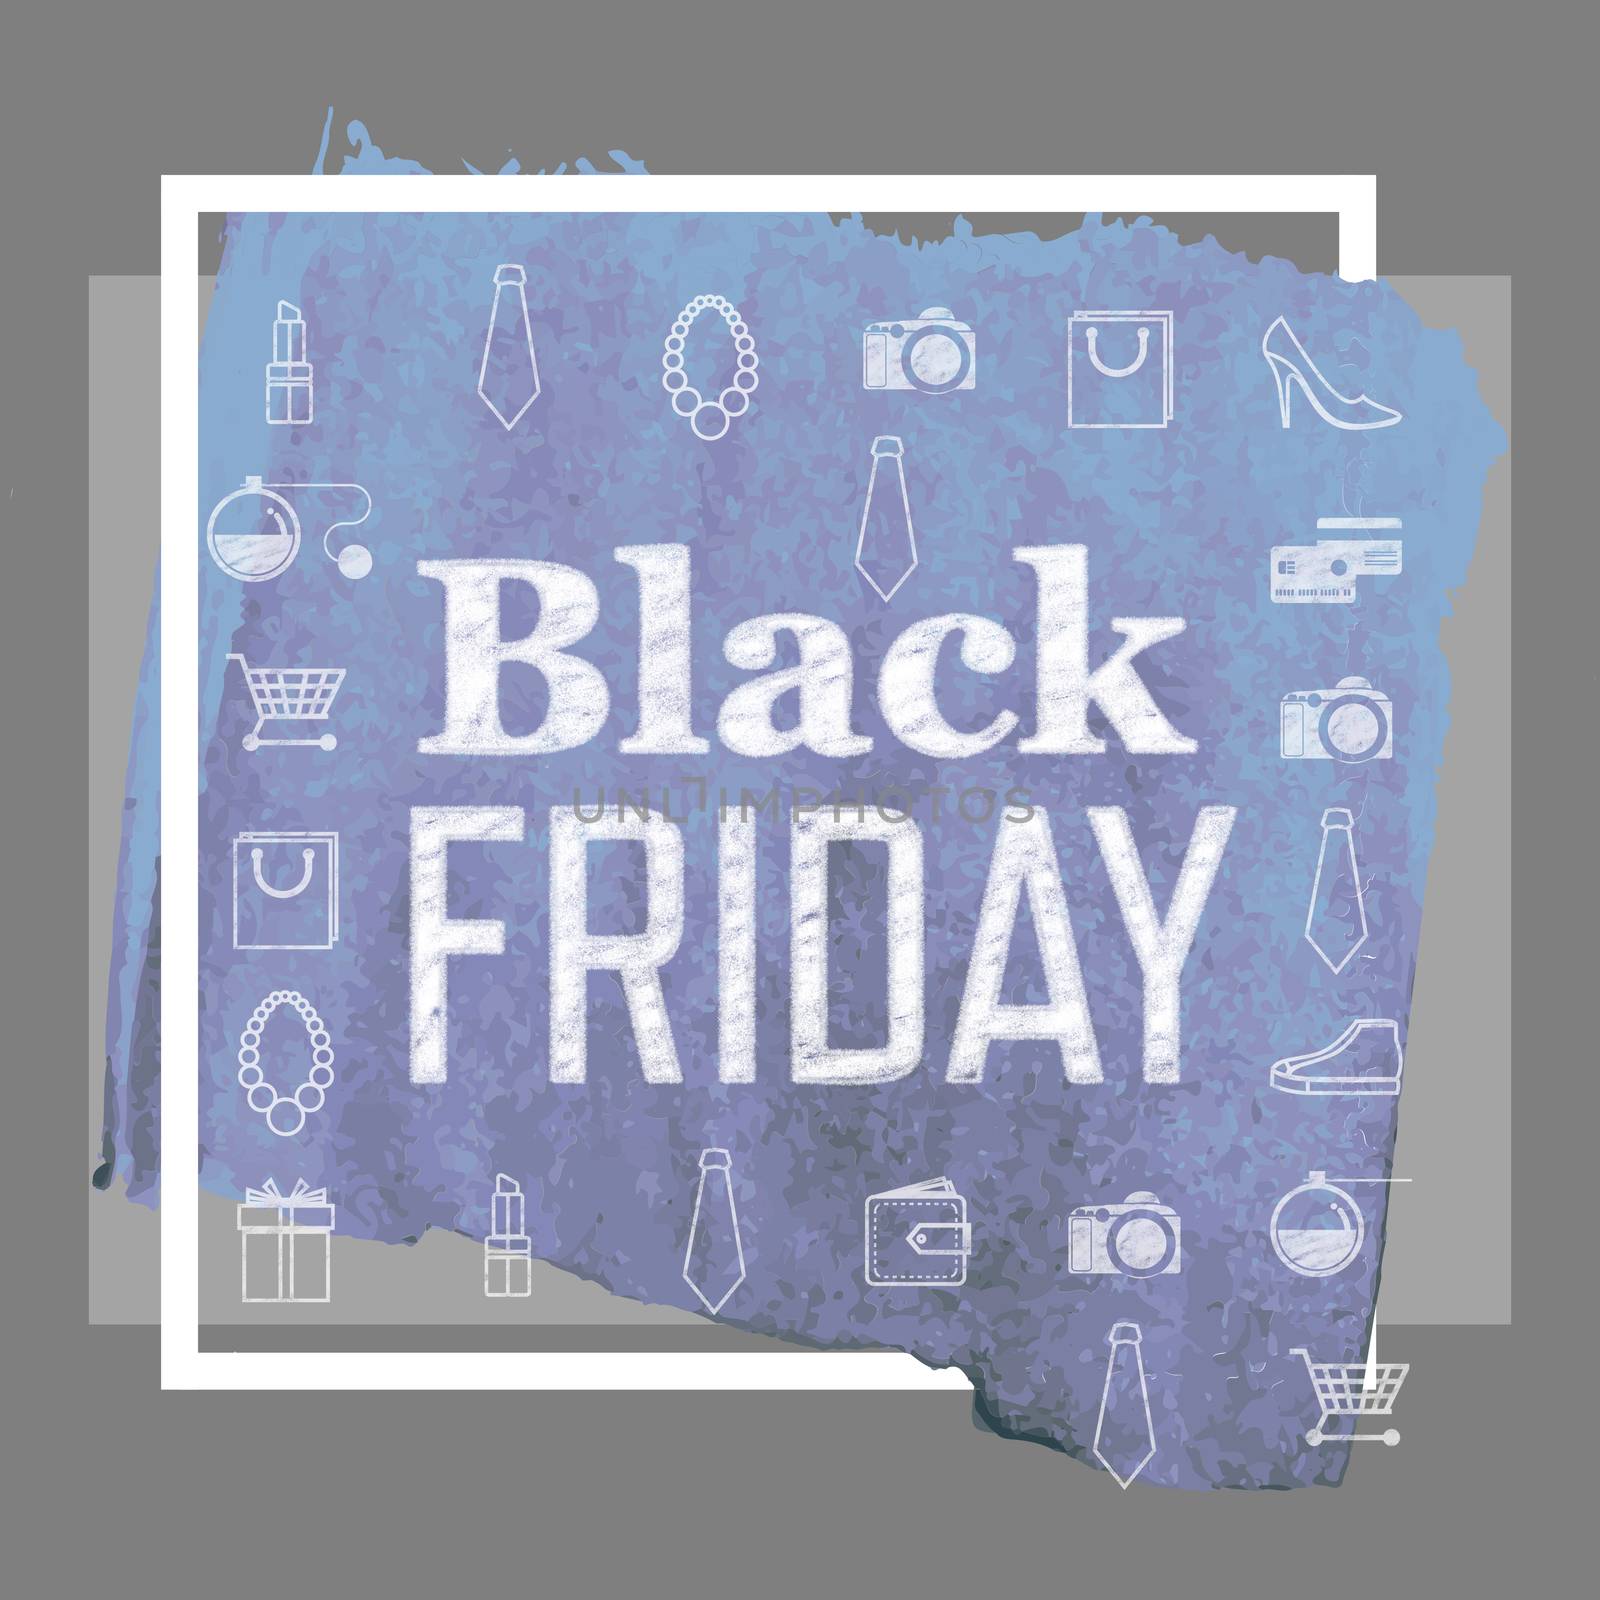 Black friday advert against digitally generated image of smudged blue paint 